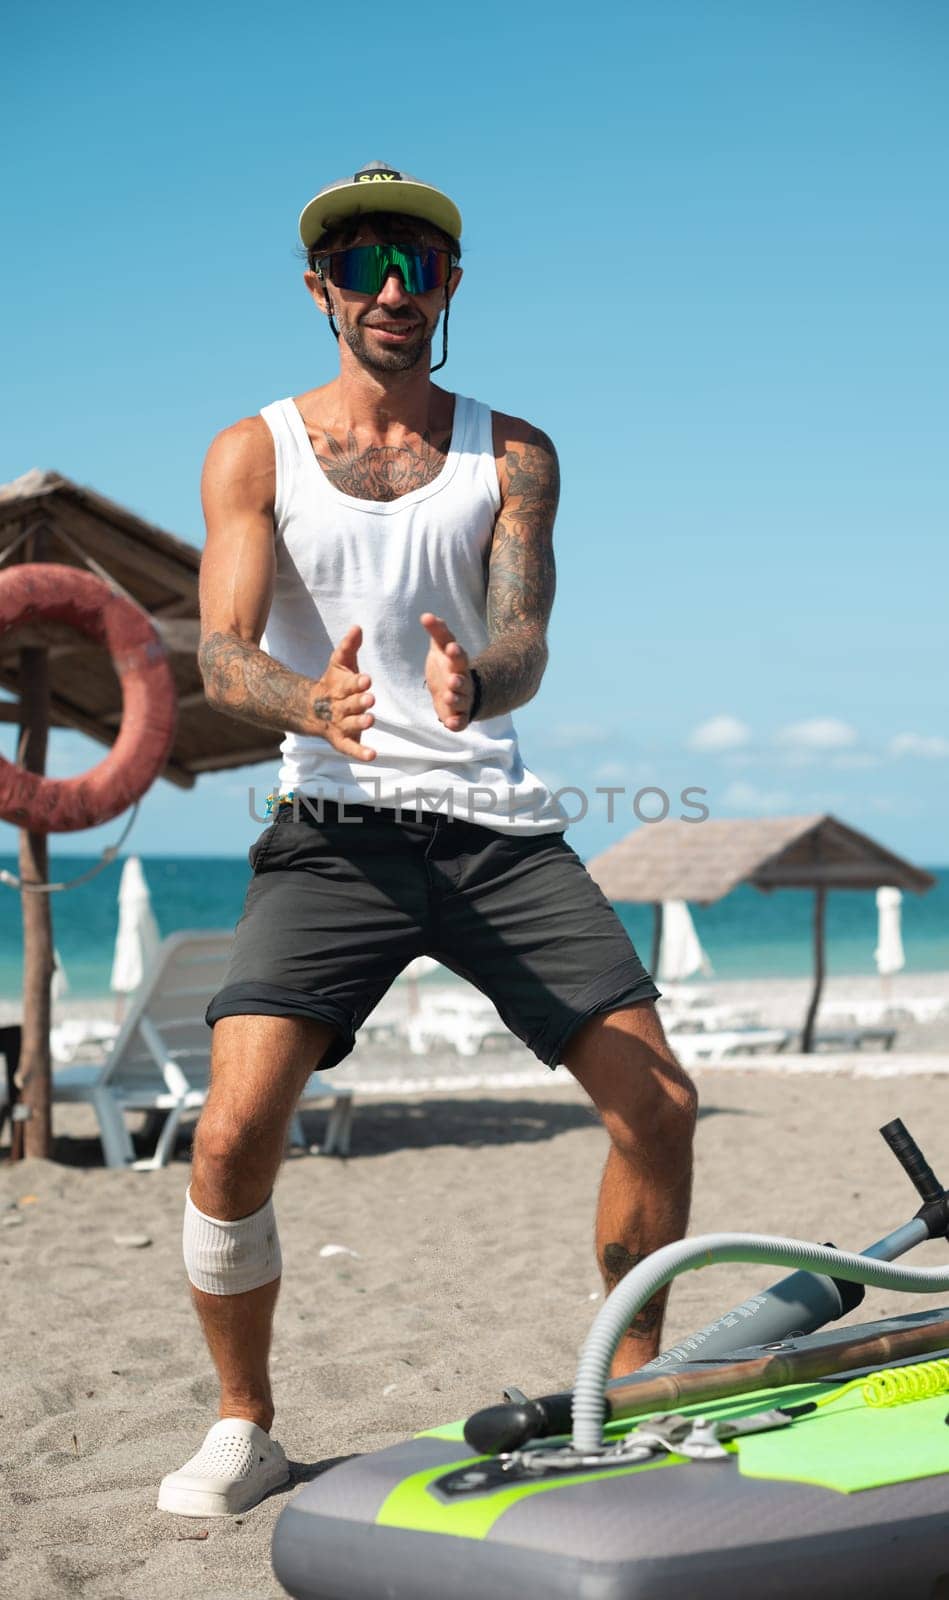 a sporty surfer guy with a pump pumps up an inflatable SUP board for swimming on the seashore by Rotozey